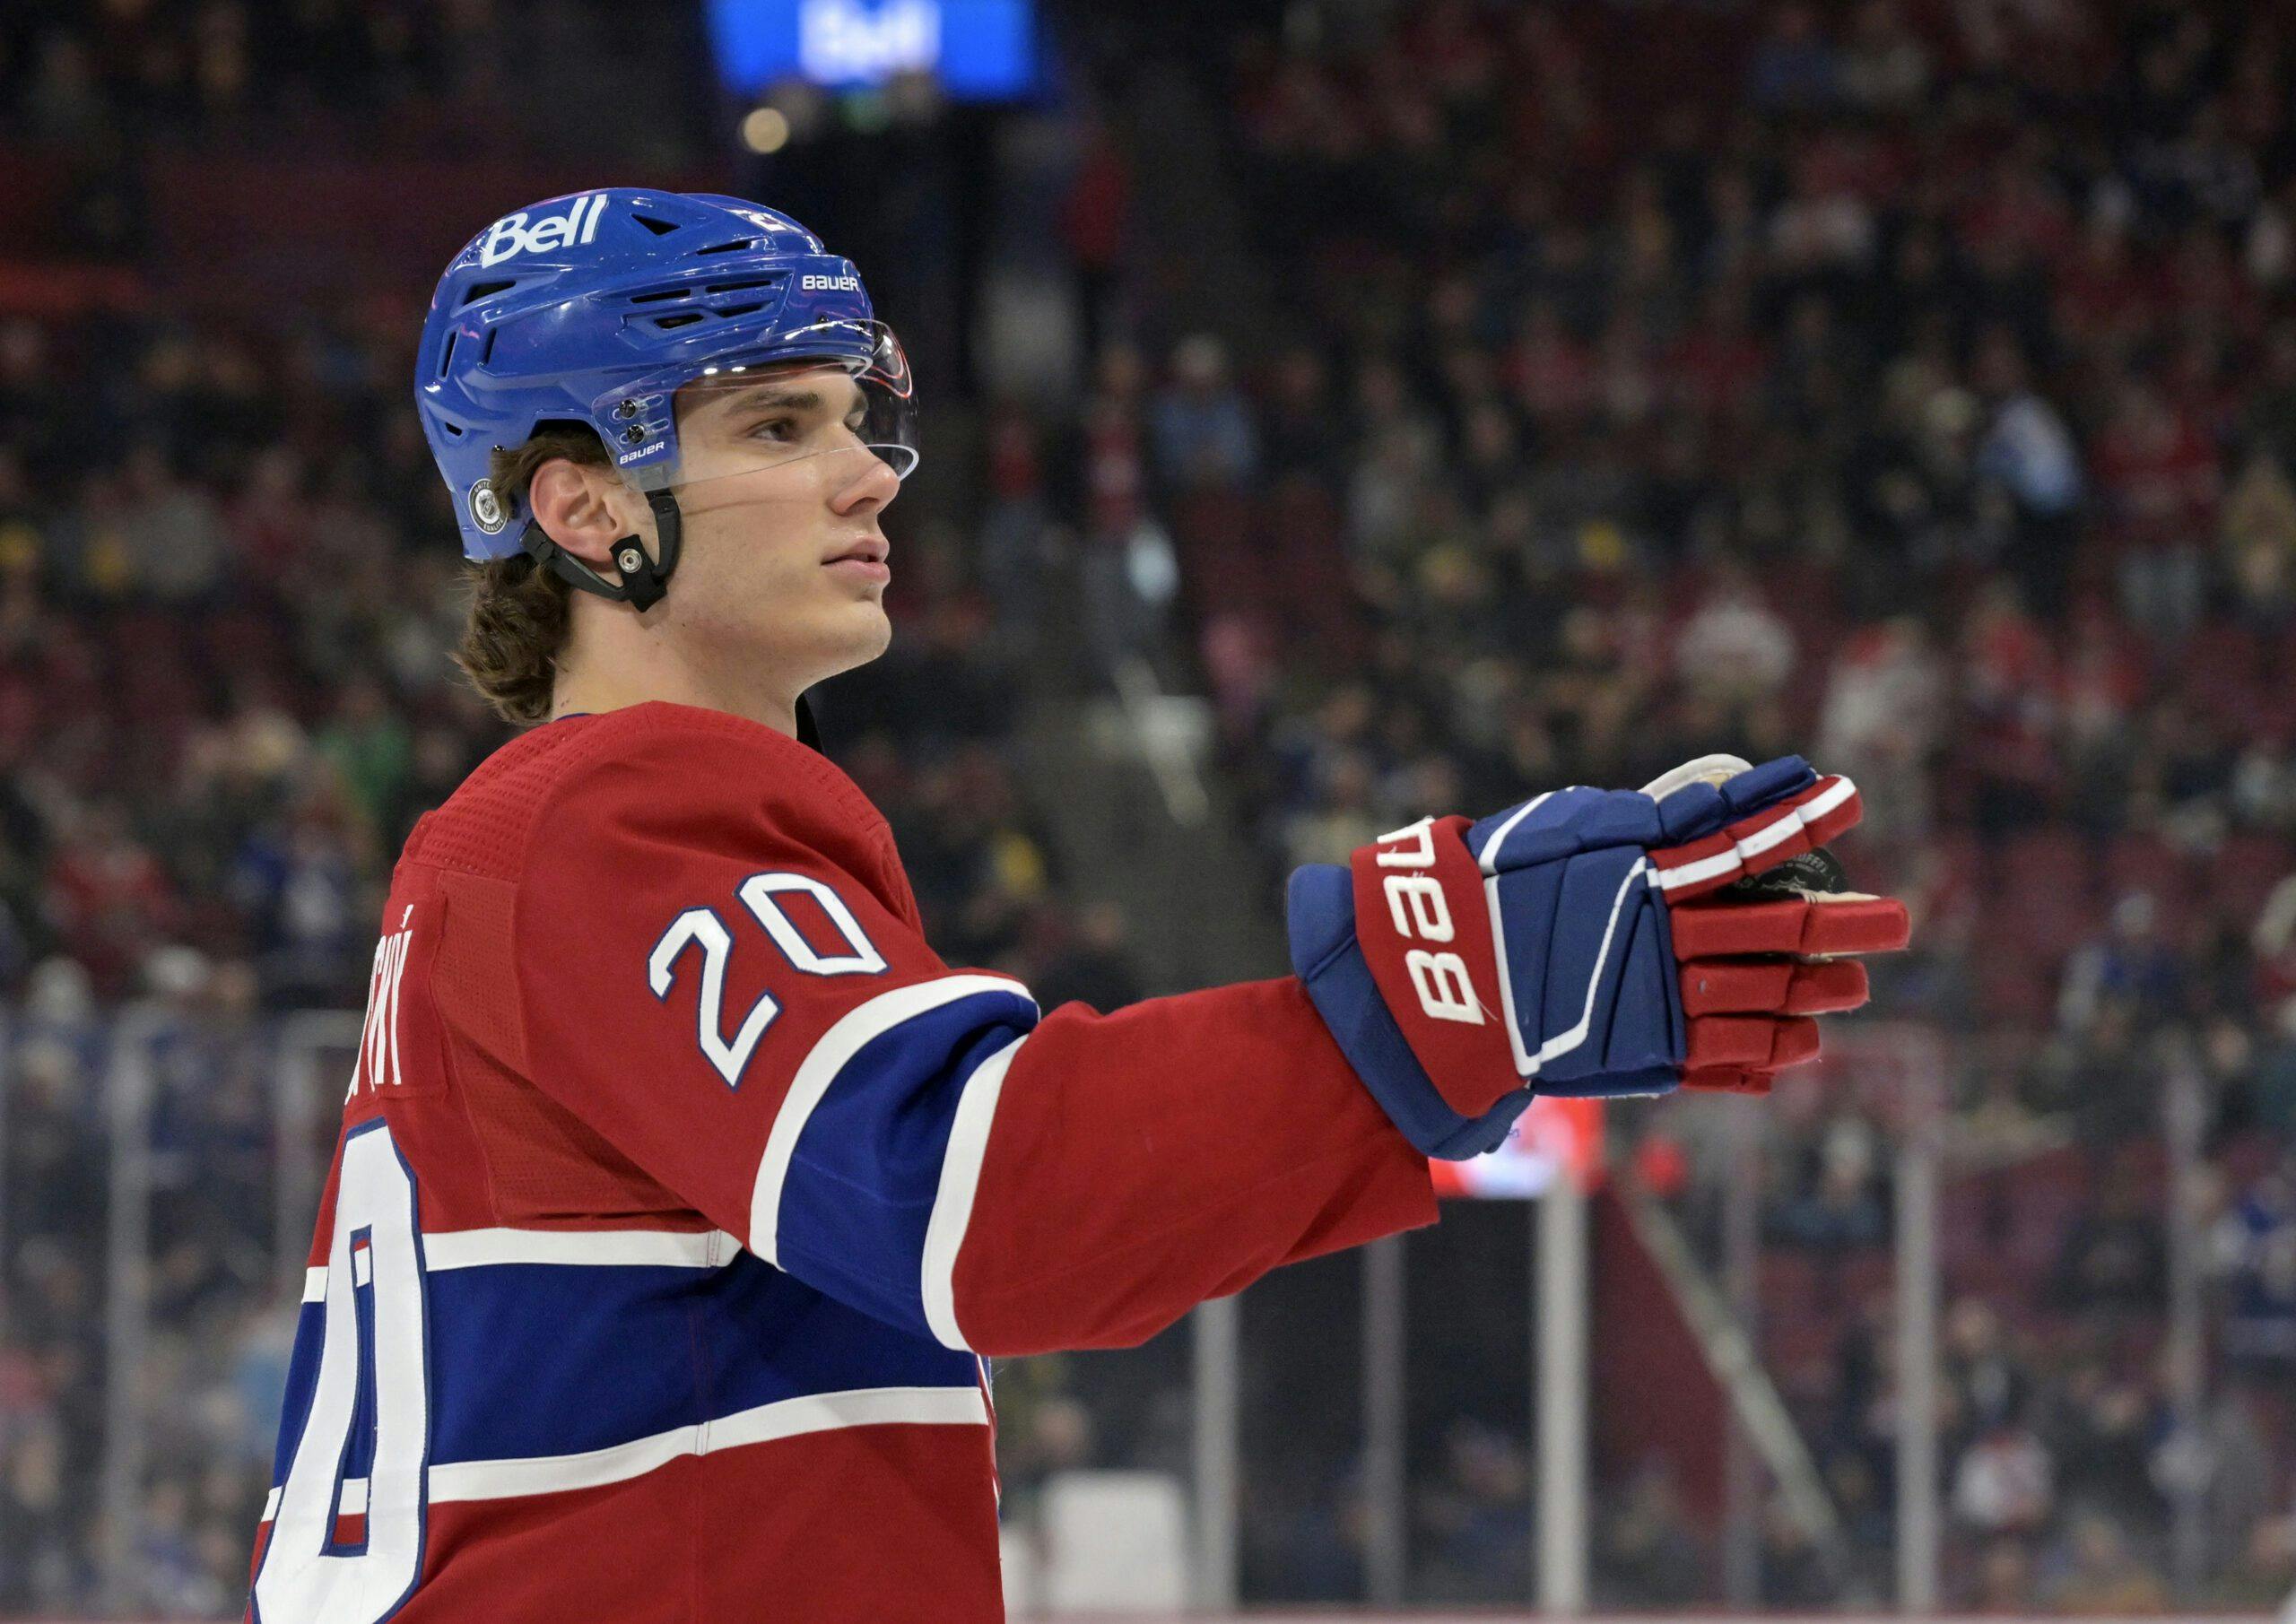 Patience and confidence have helped Juraj Slafkovsky find game with the Montreal Canadiens